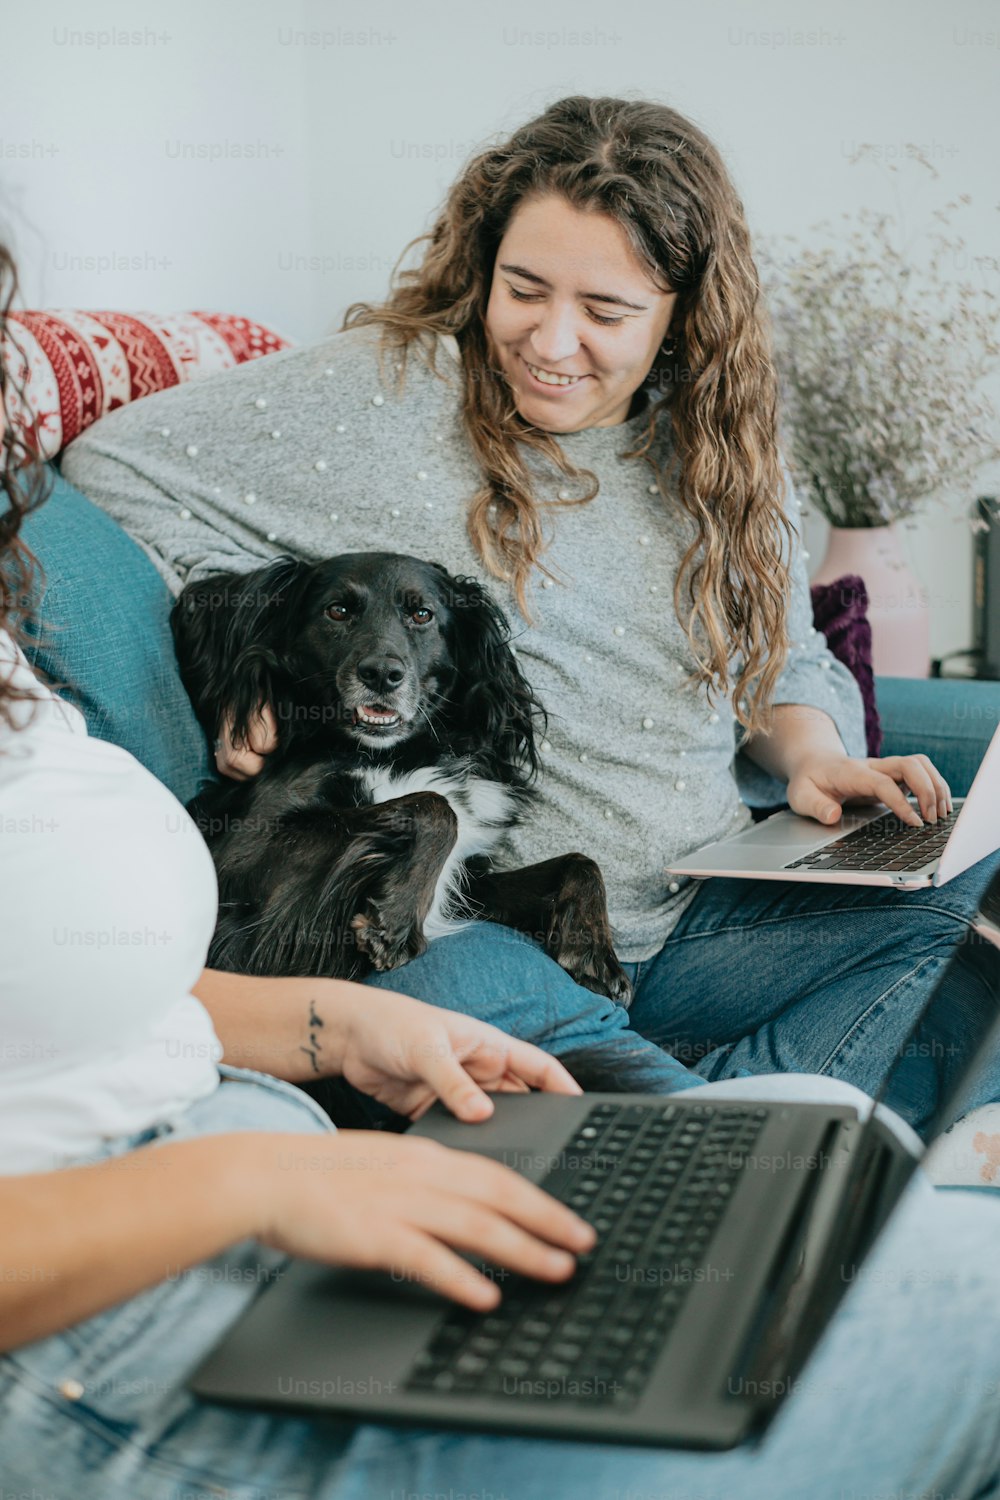 a woman sitting on a couch with a dog and a laptop